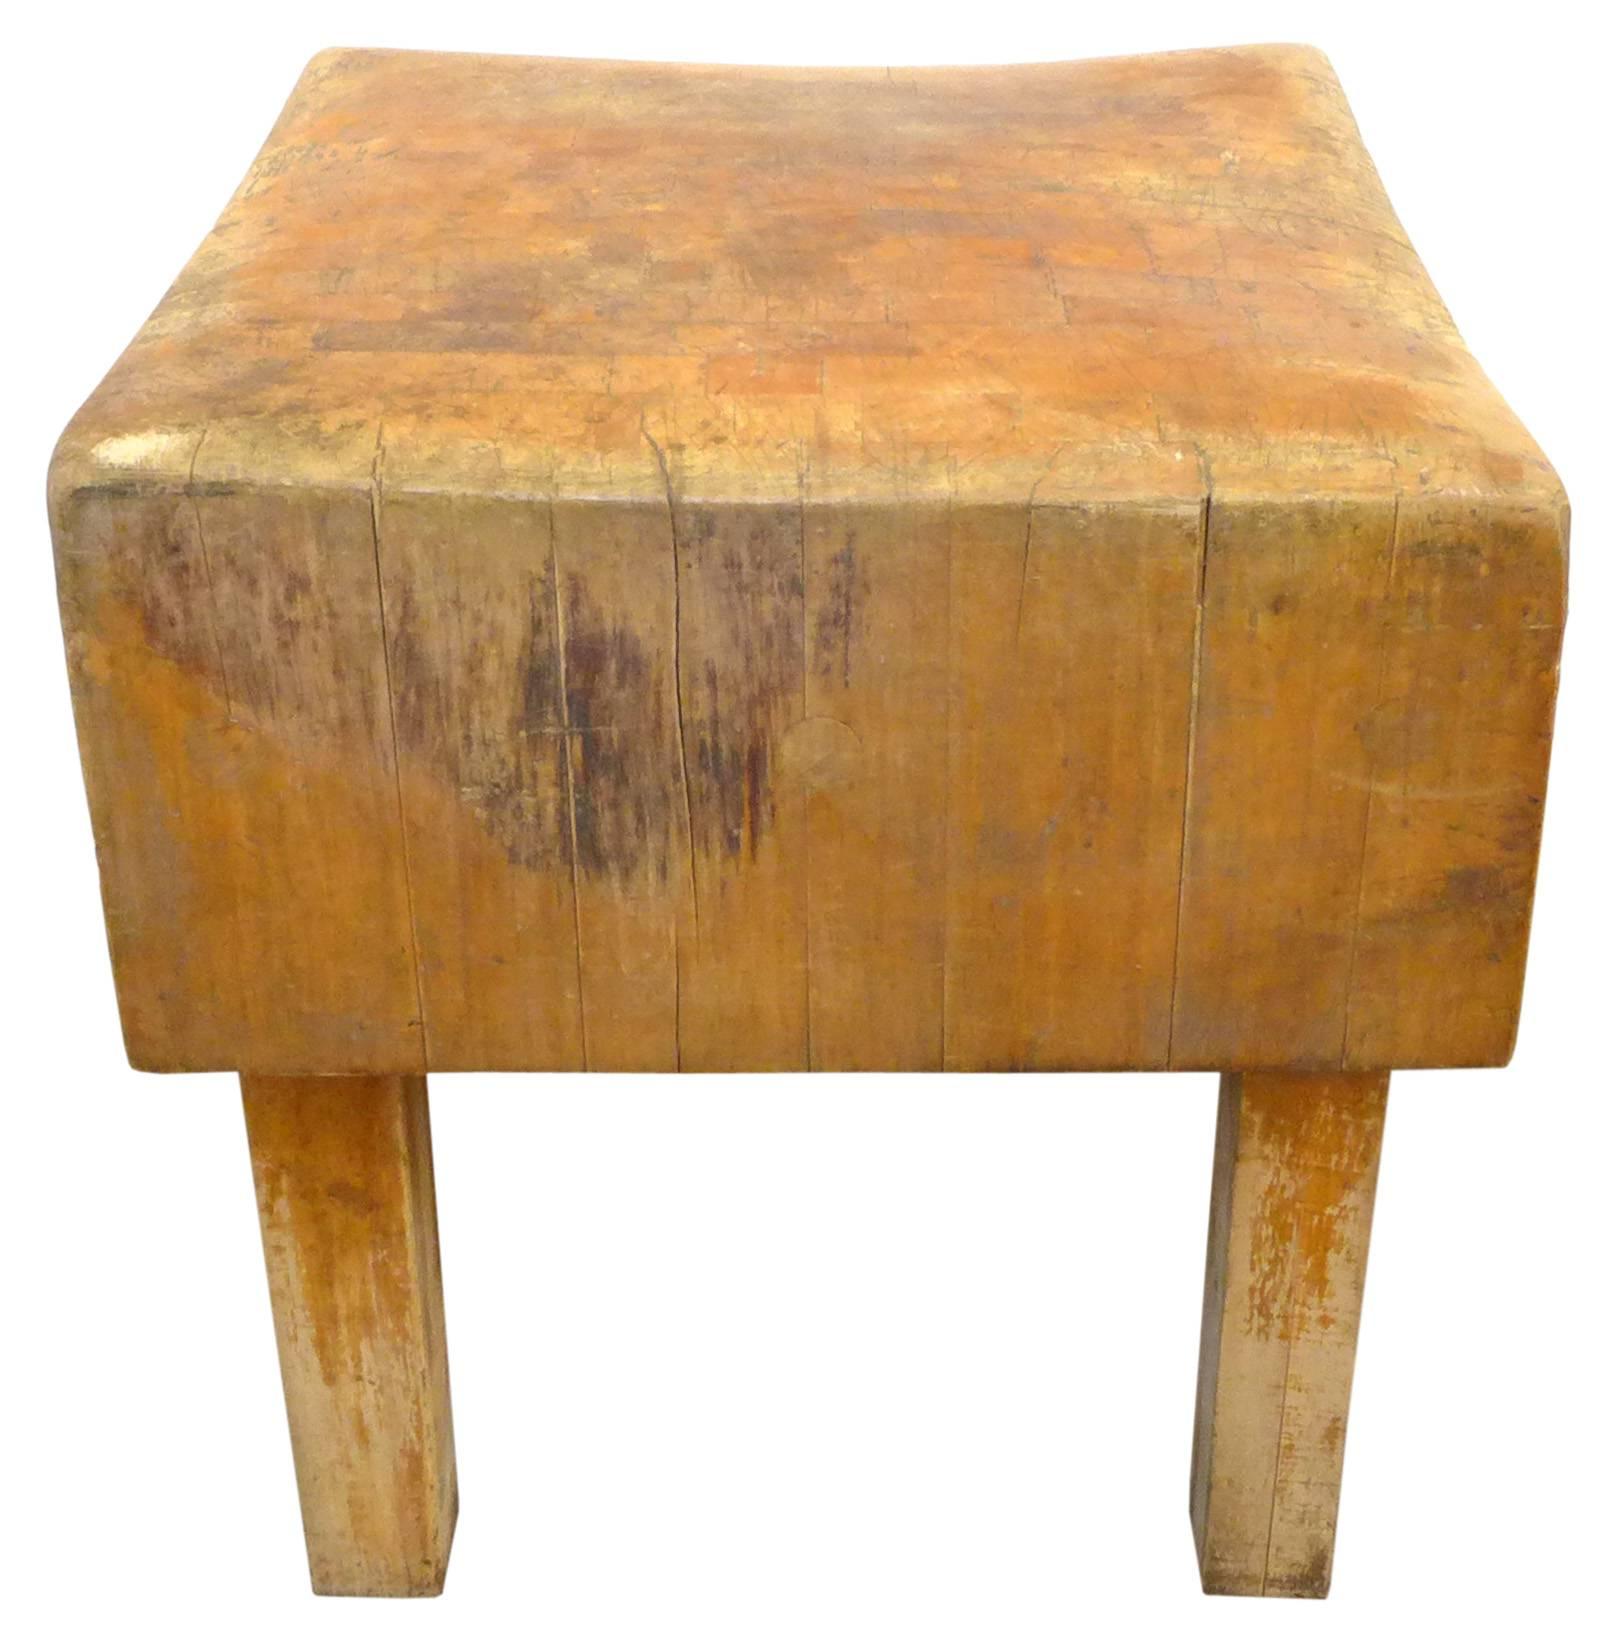 An incredible, vintage, wood butcher-block table. Hailing from a Los Angeles market opening in the 1930s, an unbelievable piece, beautifully worn from years of use. The top surface revealing great craftsmanship in its intricate dovetail joinery. The